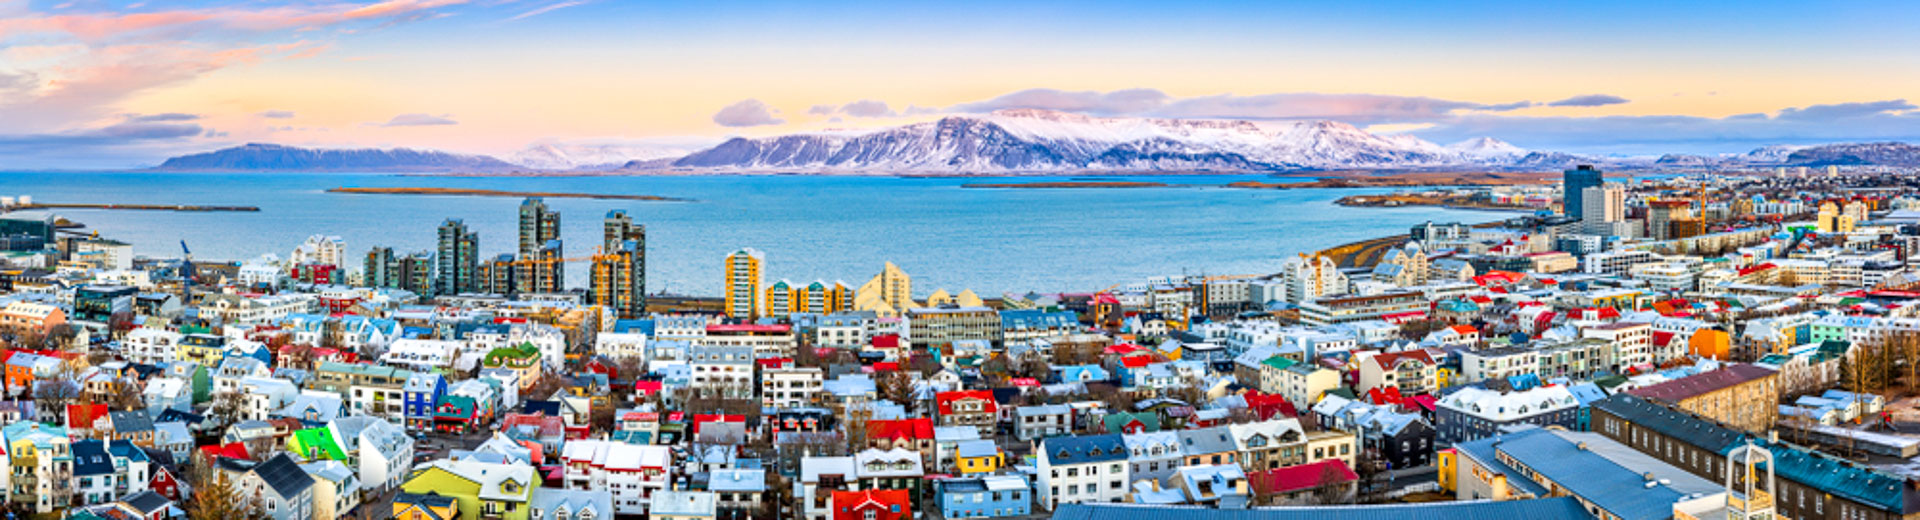 Aerial panorama of downtown Reykjavik at sunset with colorful houses and snowy mountains in the background